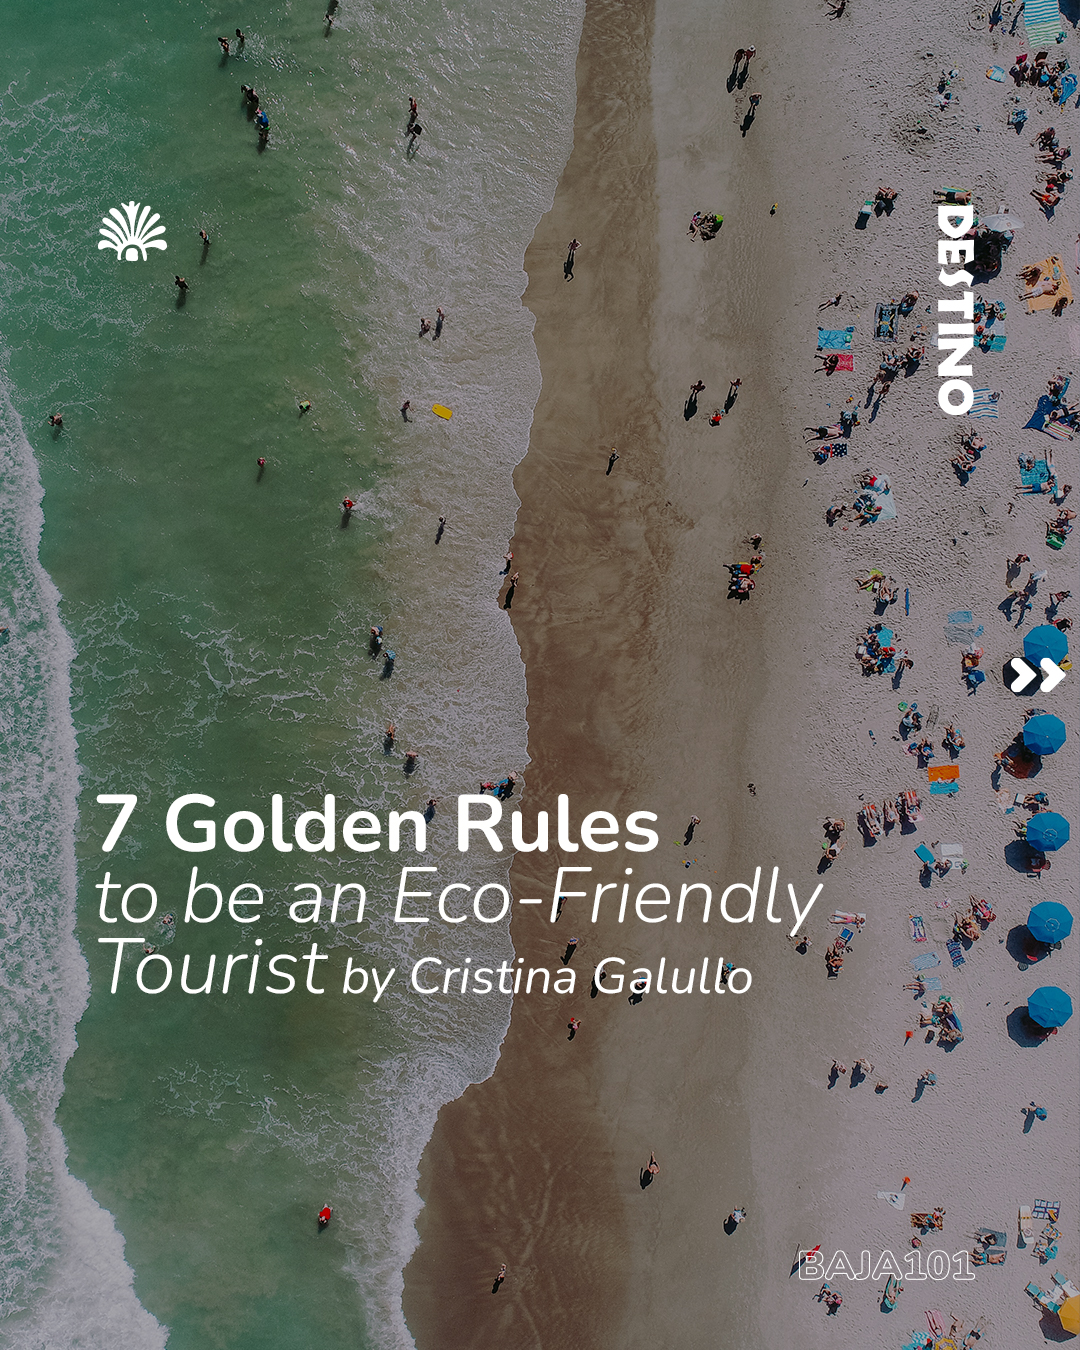 7-golde-rules-to-be-an-eco-friendly-tourist